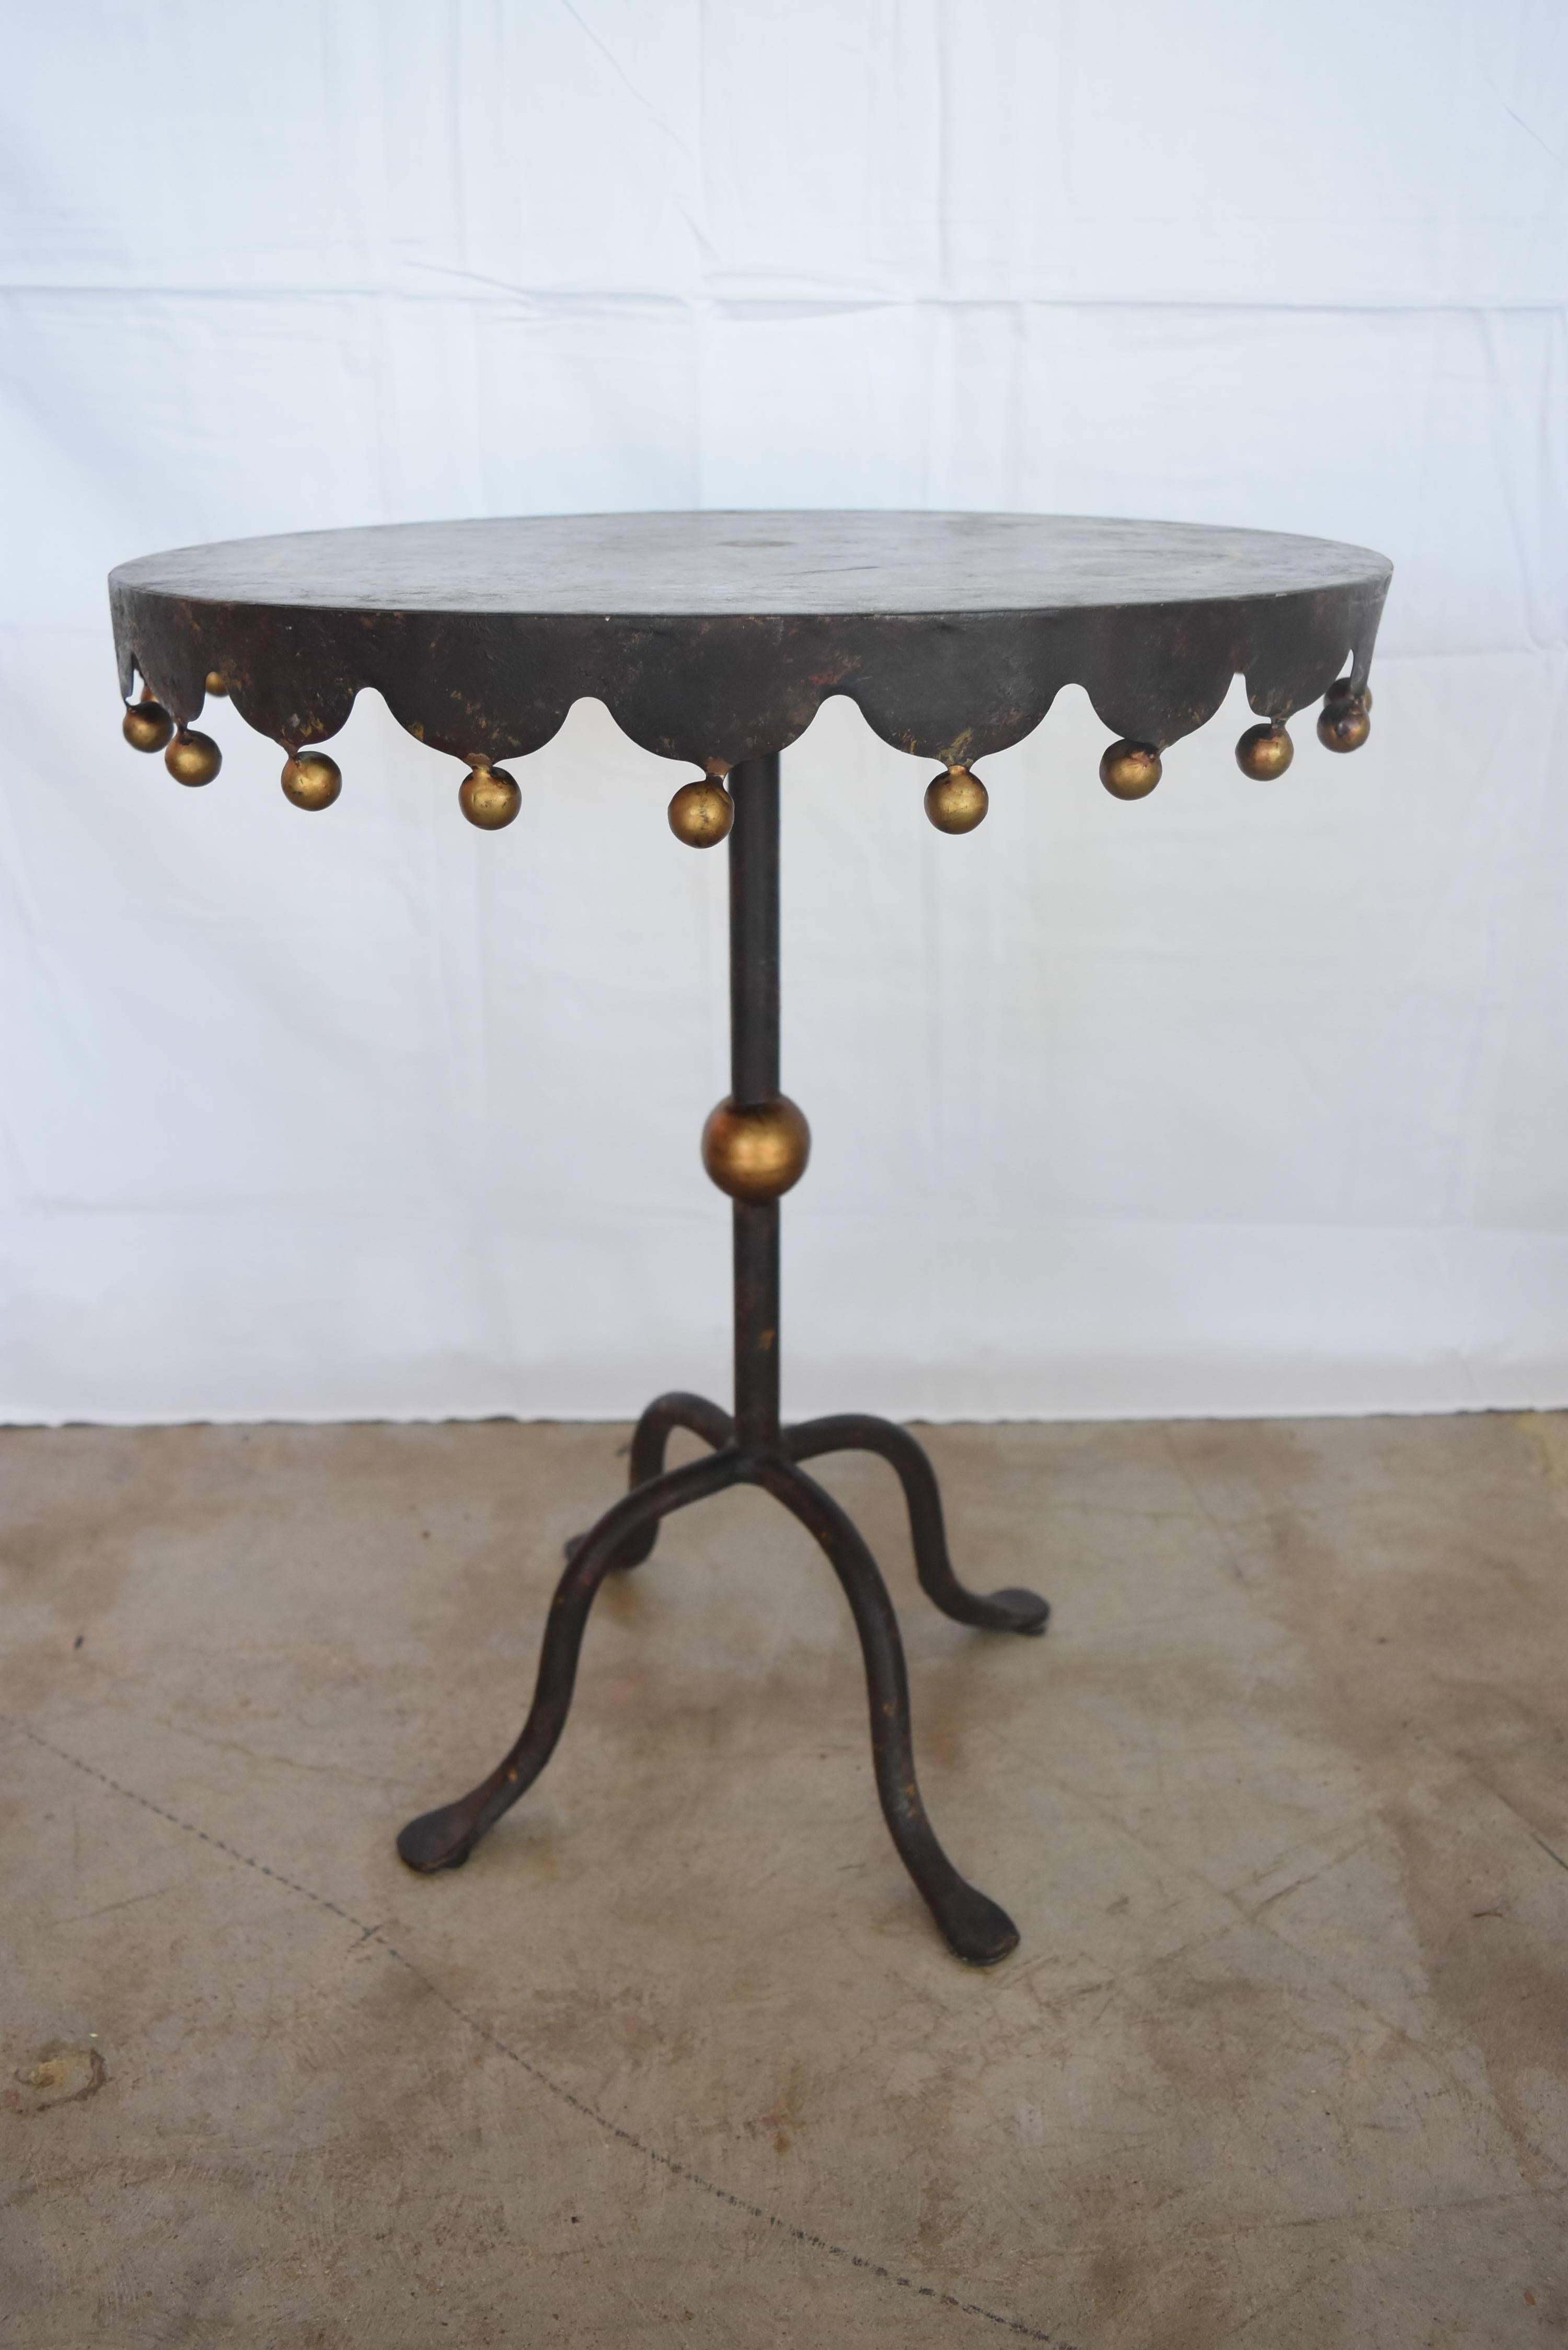 Midcentury Iron Round Side Table from Spain with Gold Gilt Detail 1